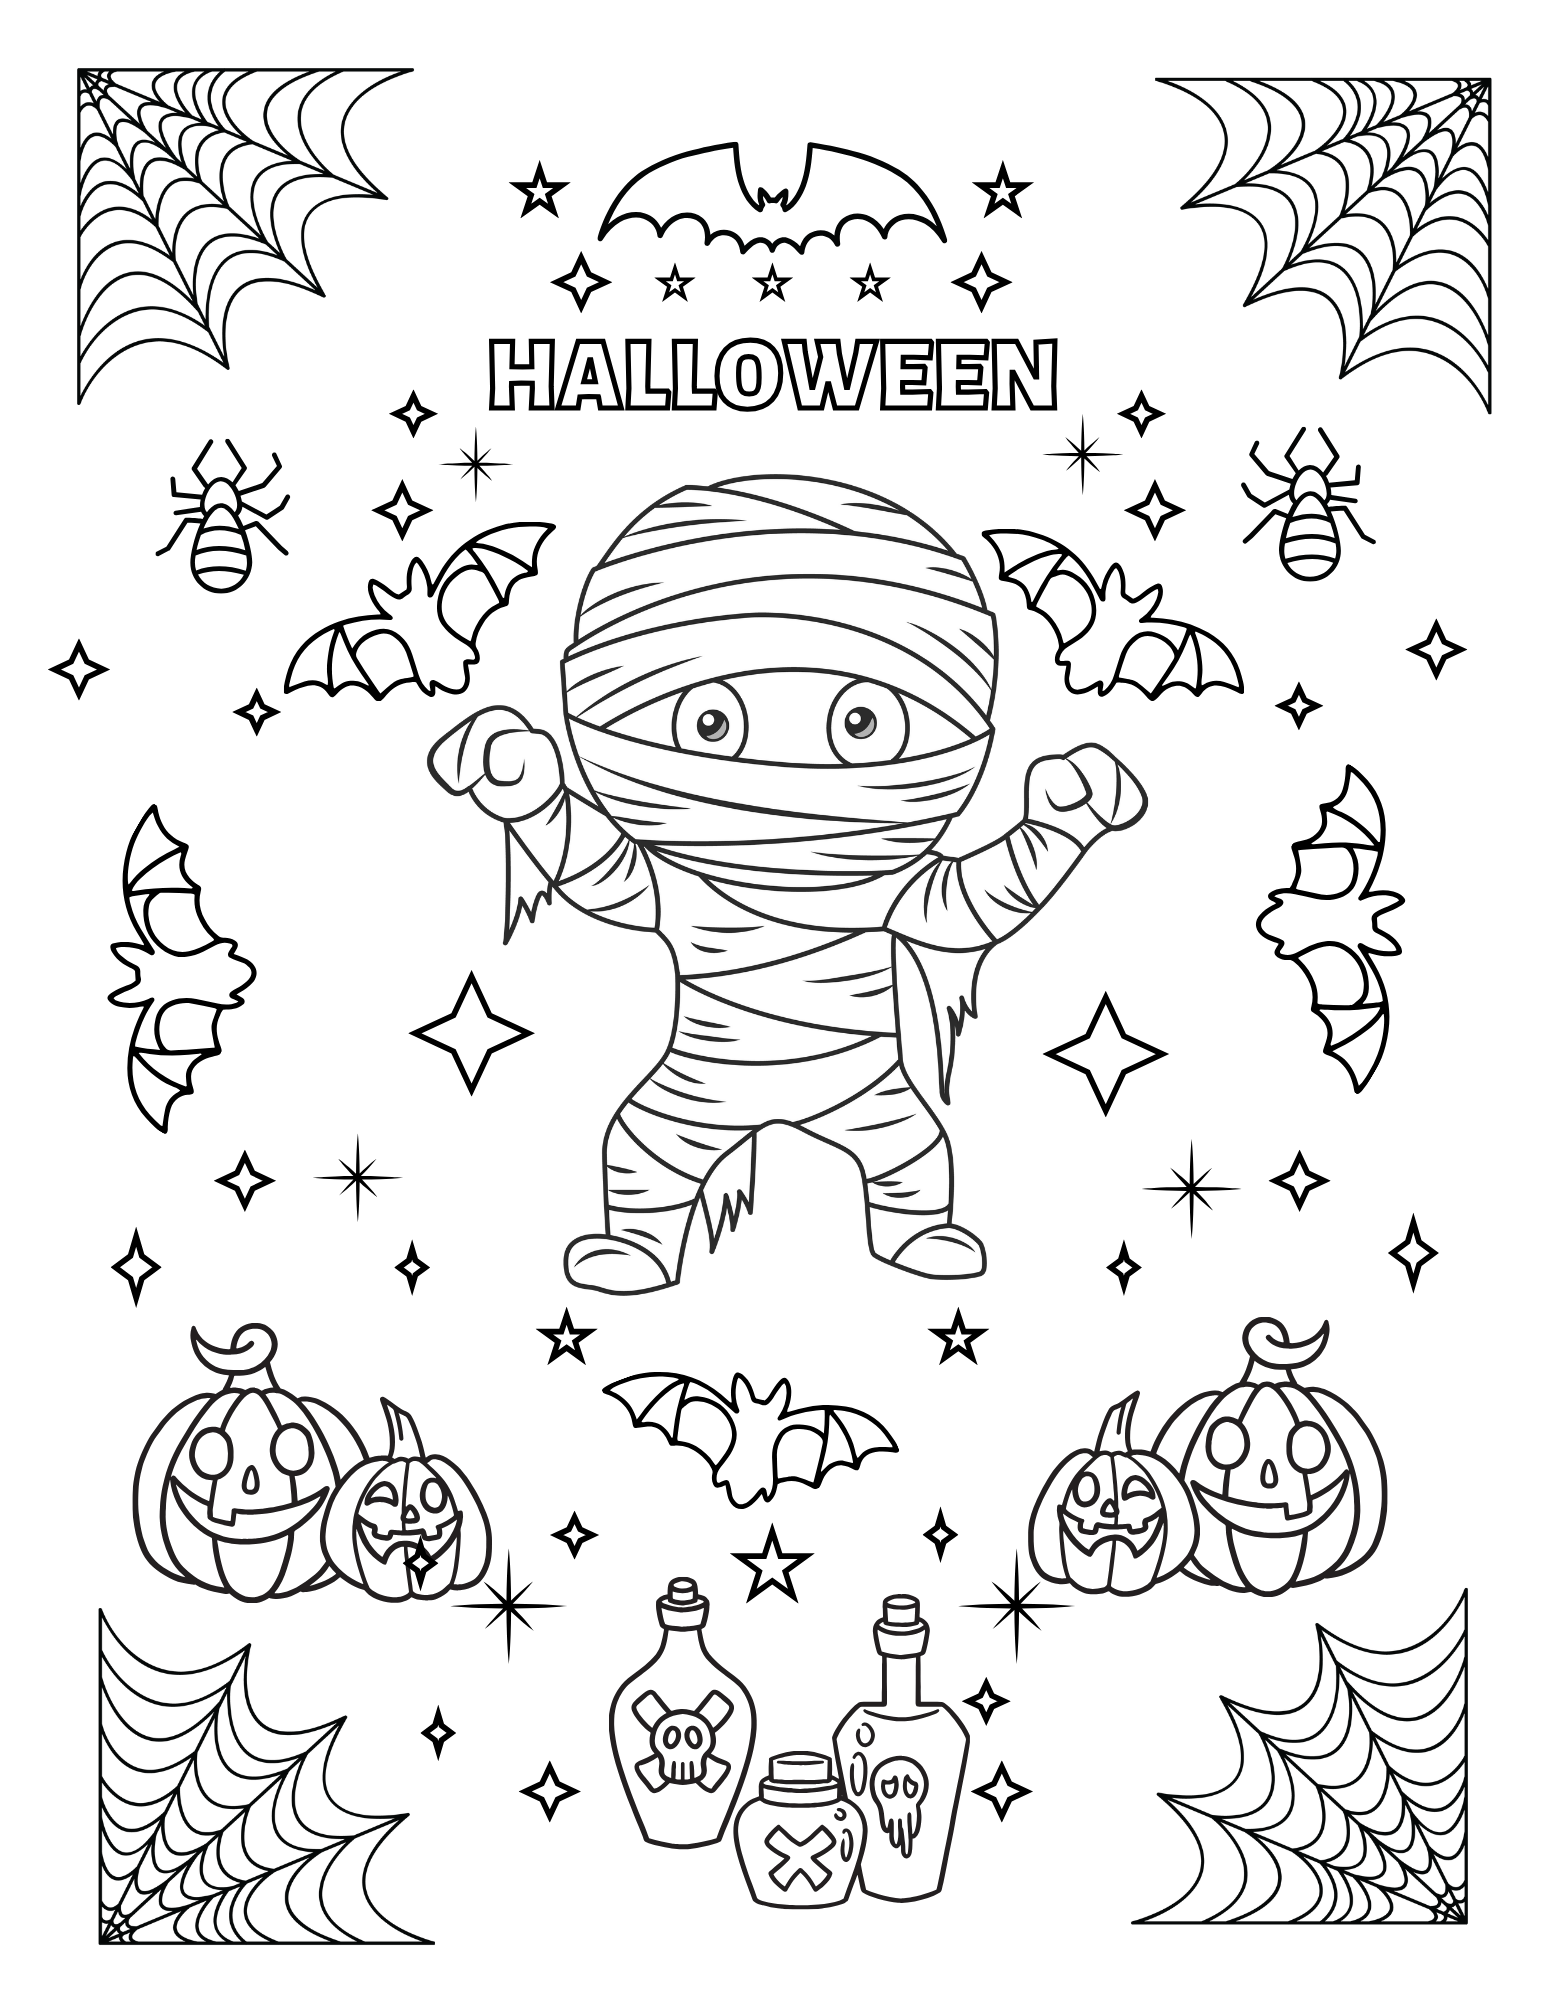 Bat themed free halloween coloring pages printable â